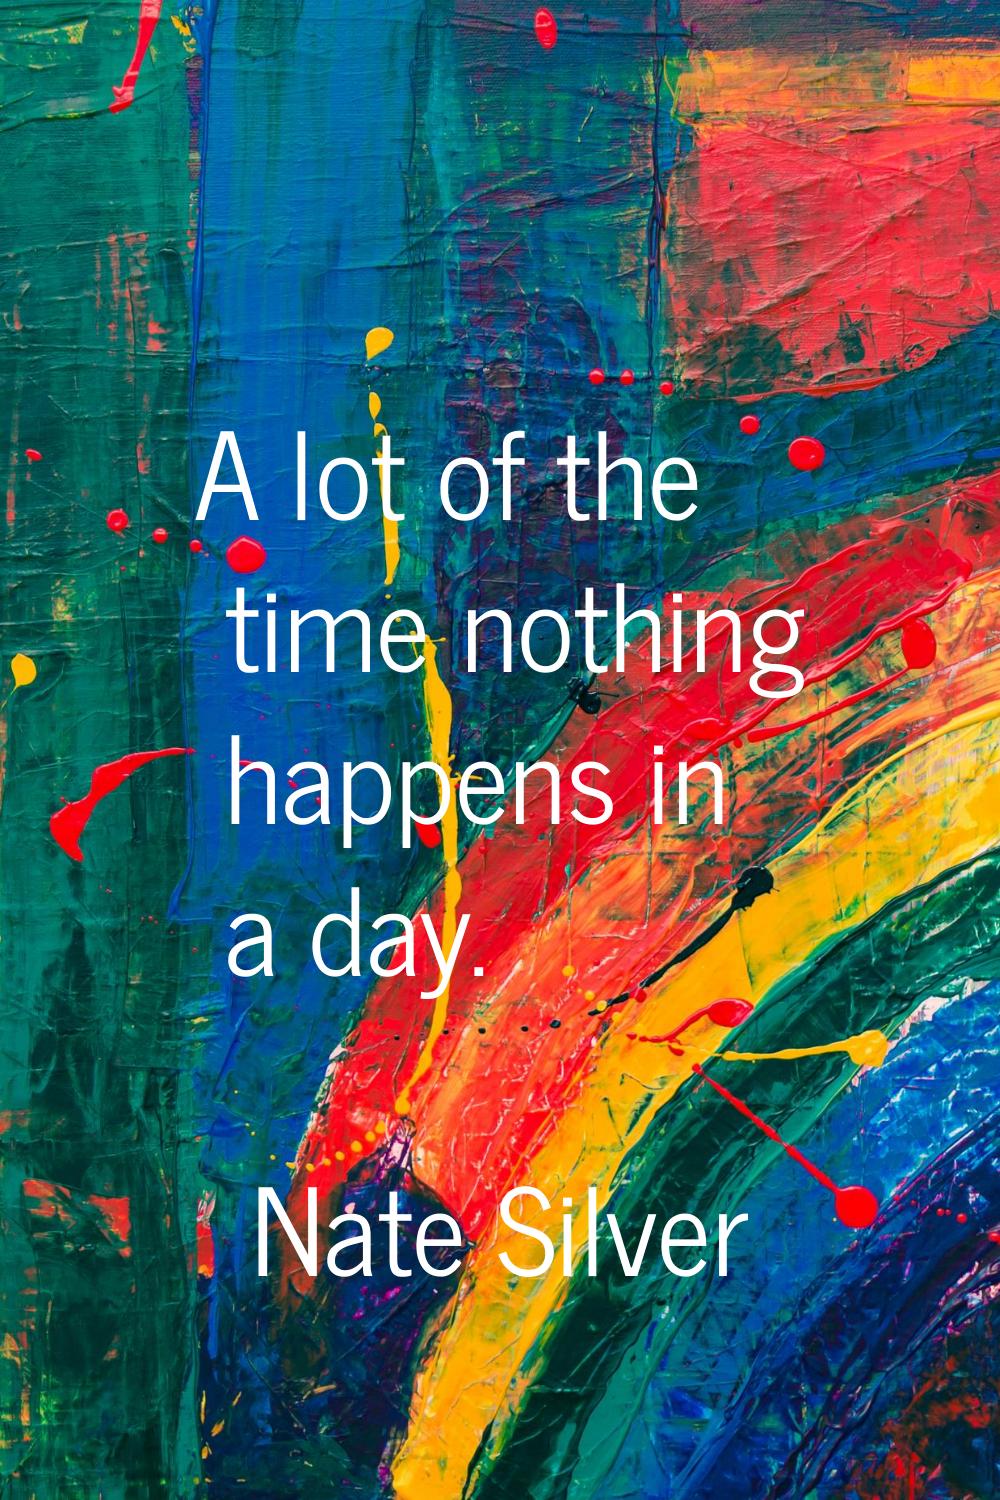 A lot of the time nothing happens in a day.